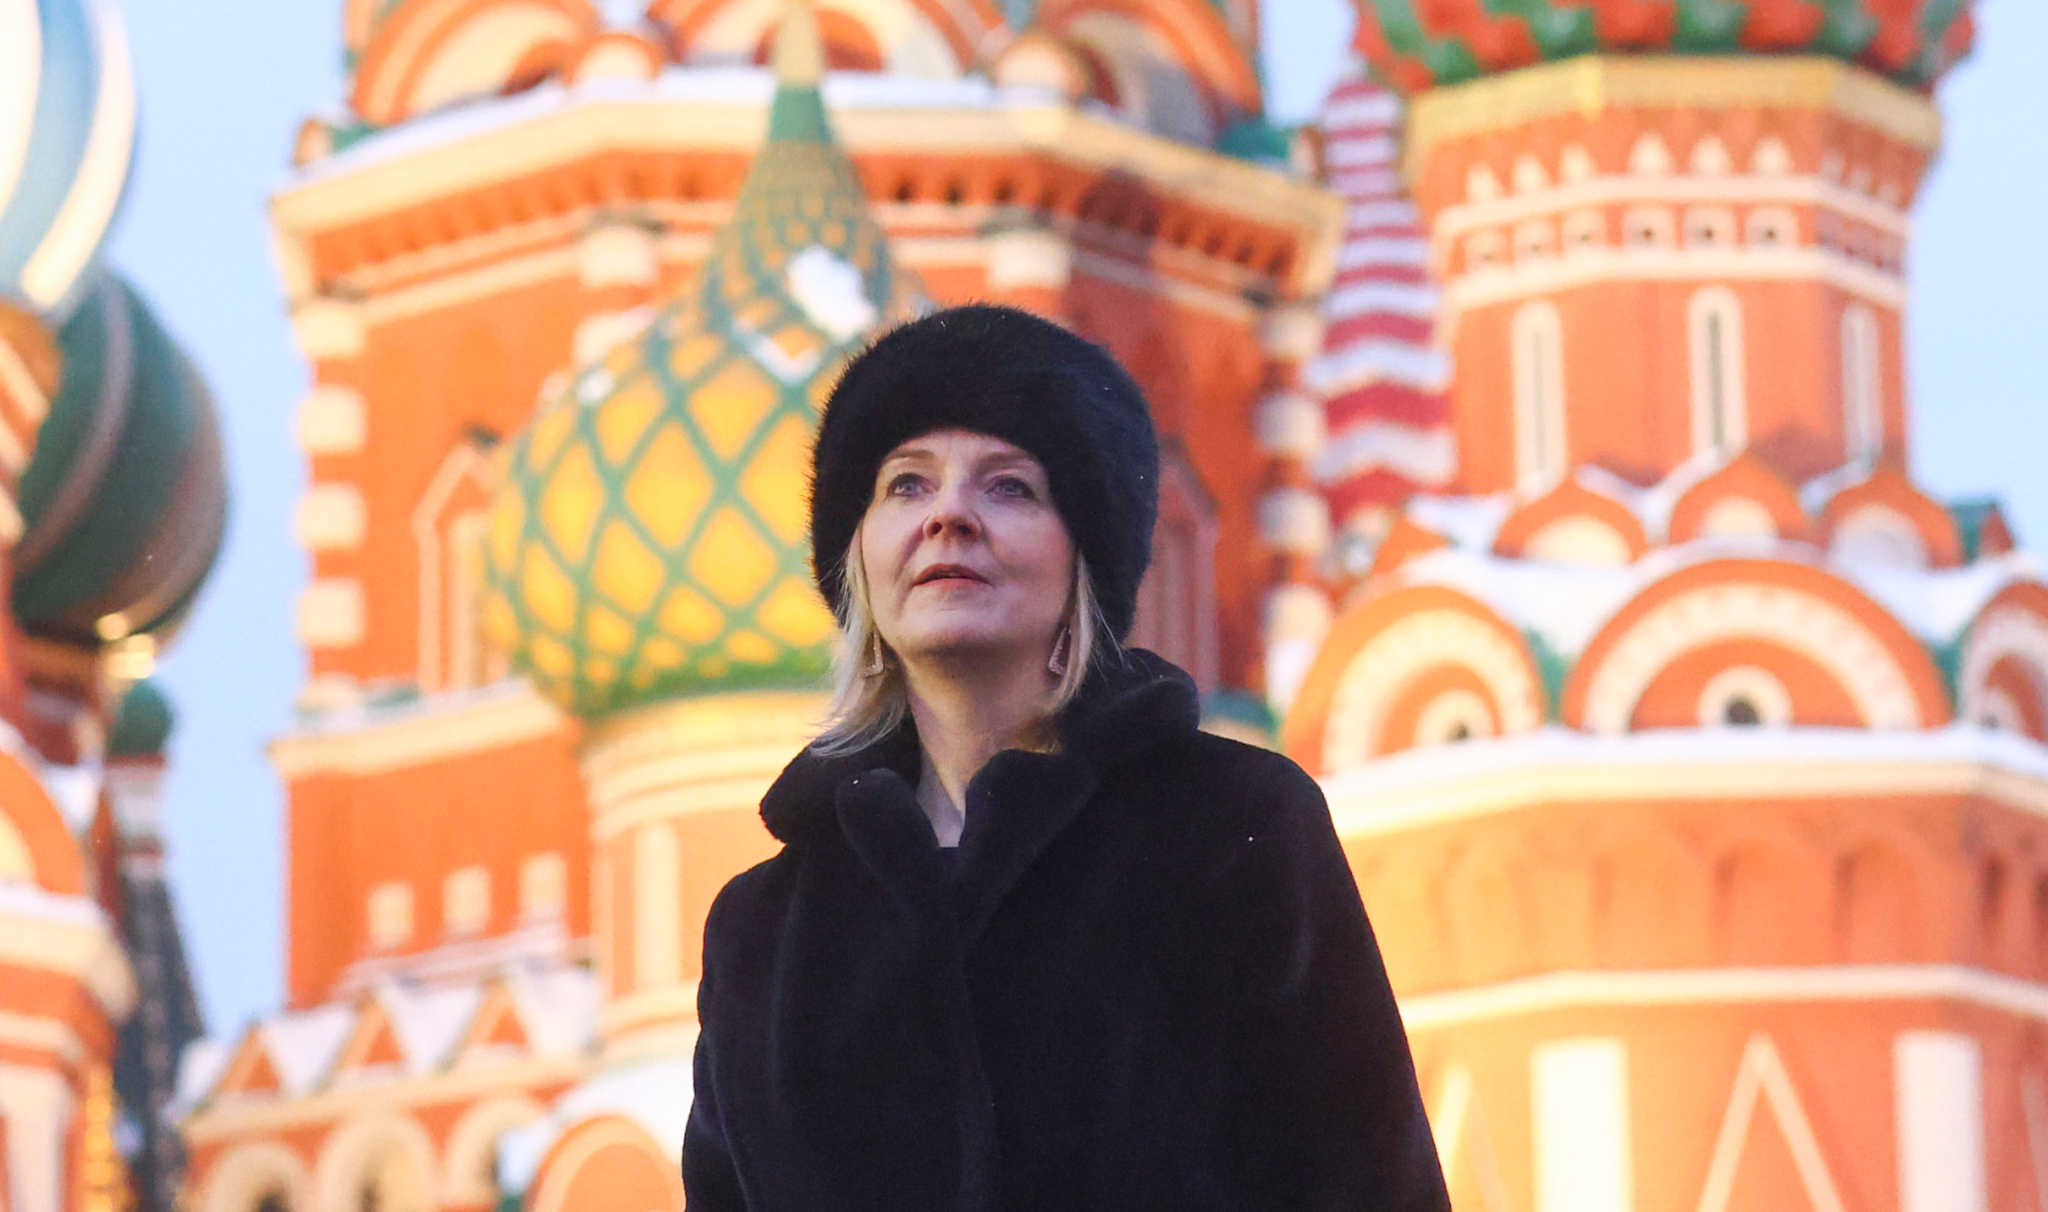 Liz Truss approved £289m of UK exports with potential military use to Russia before Ukraine invasion